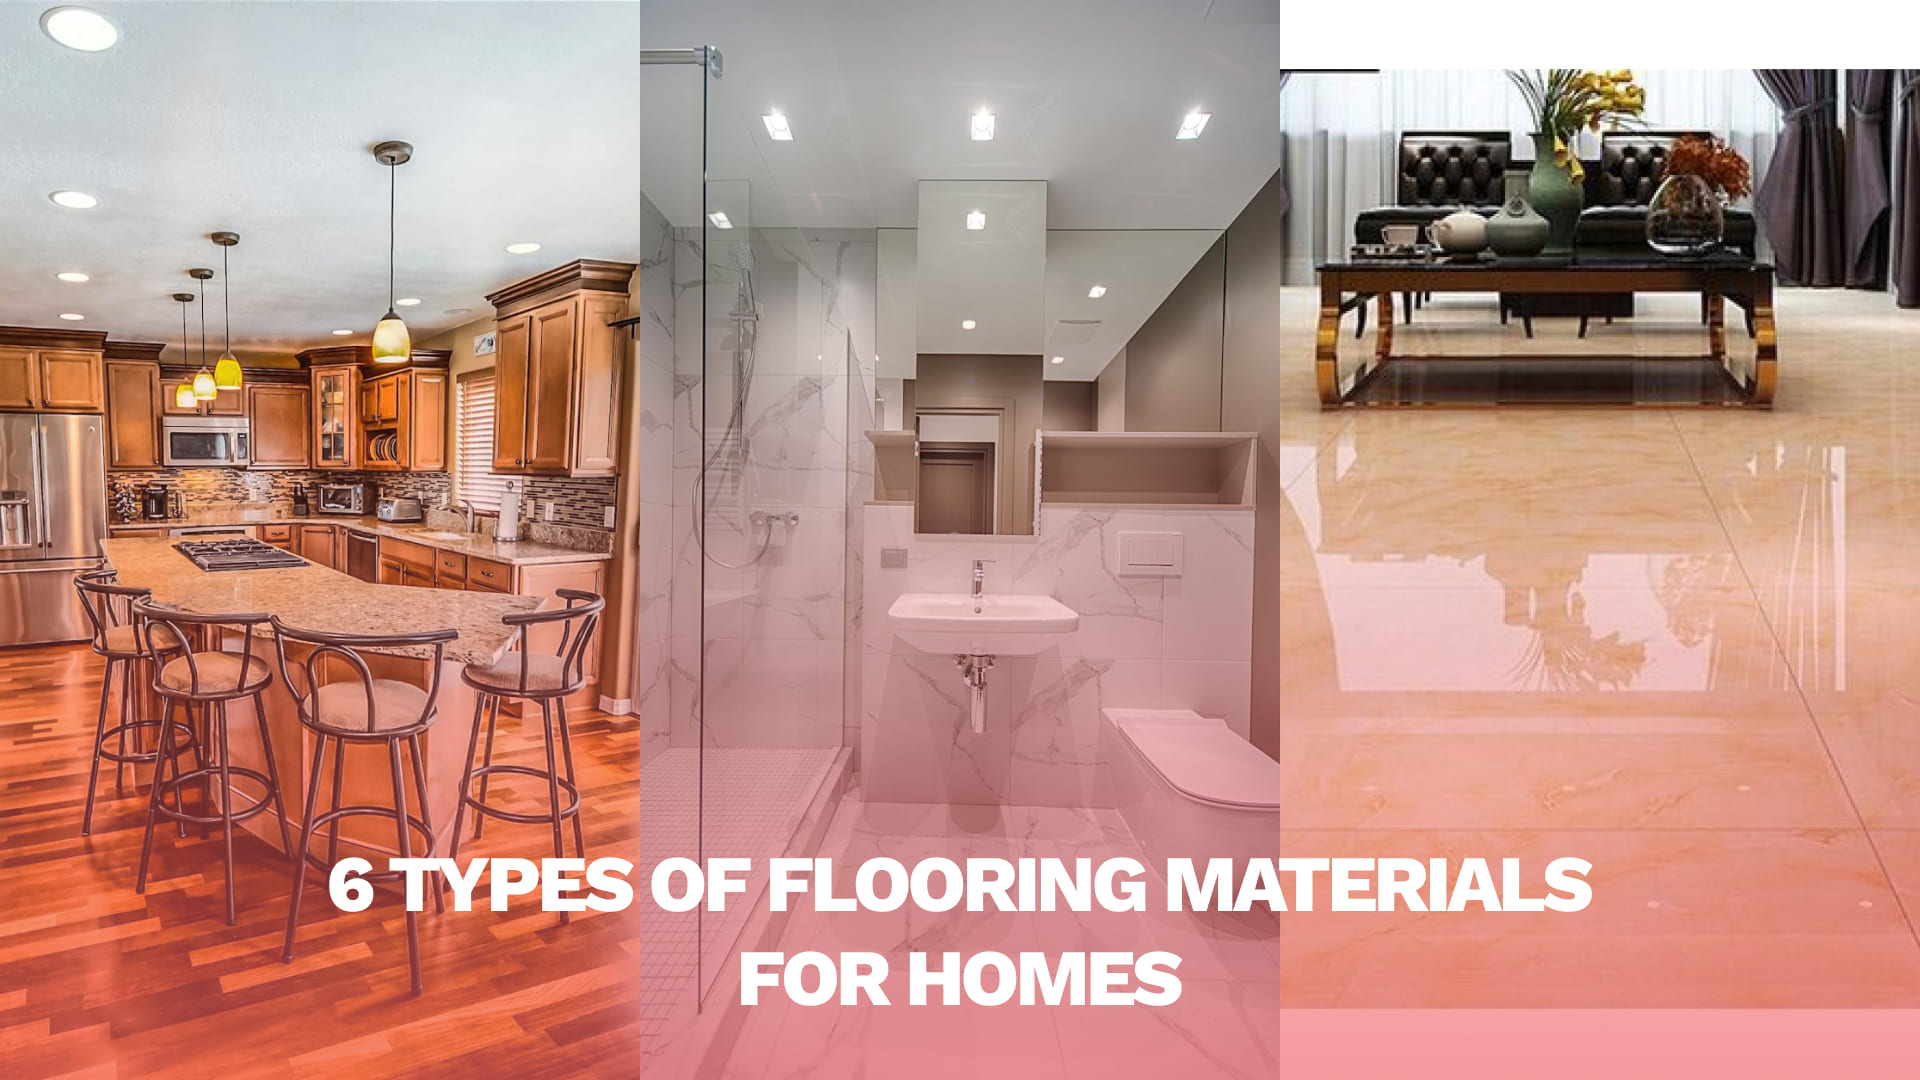 Top 6 Types of Flooring Materials for Modern Homes